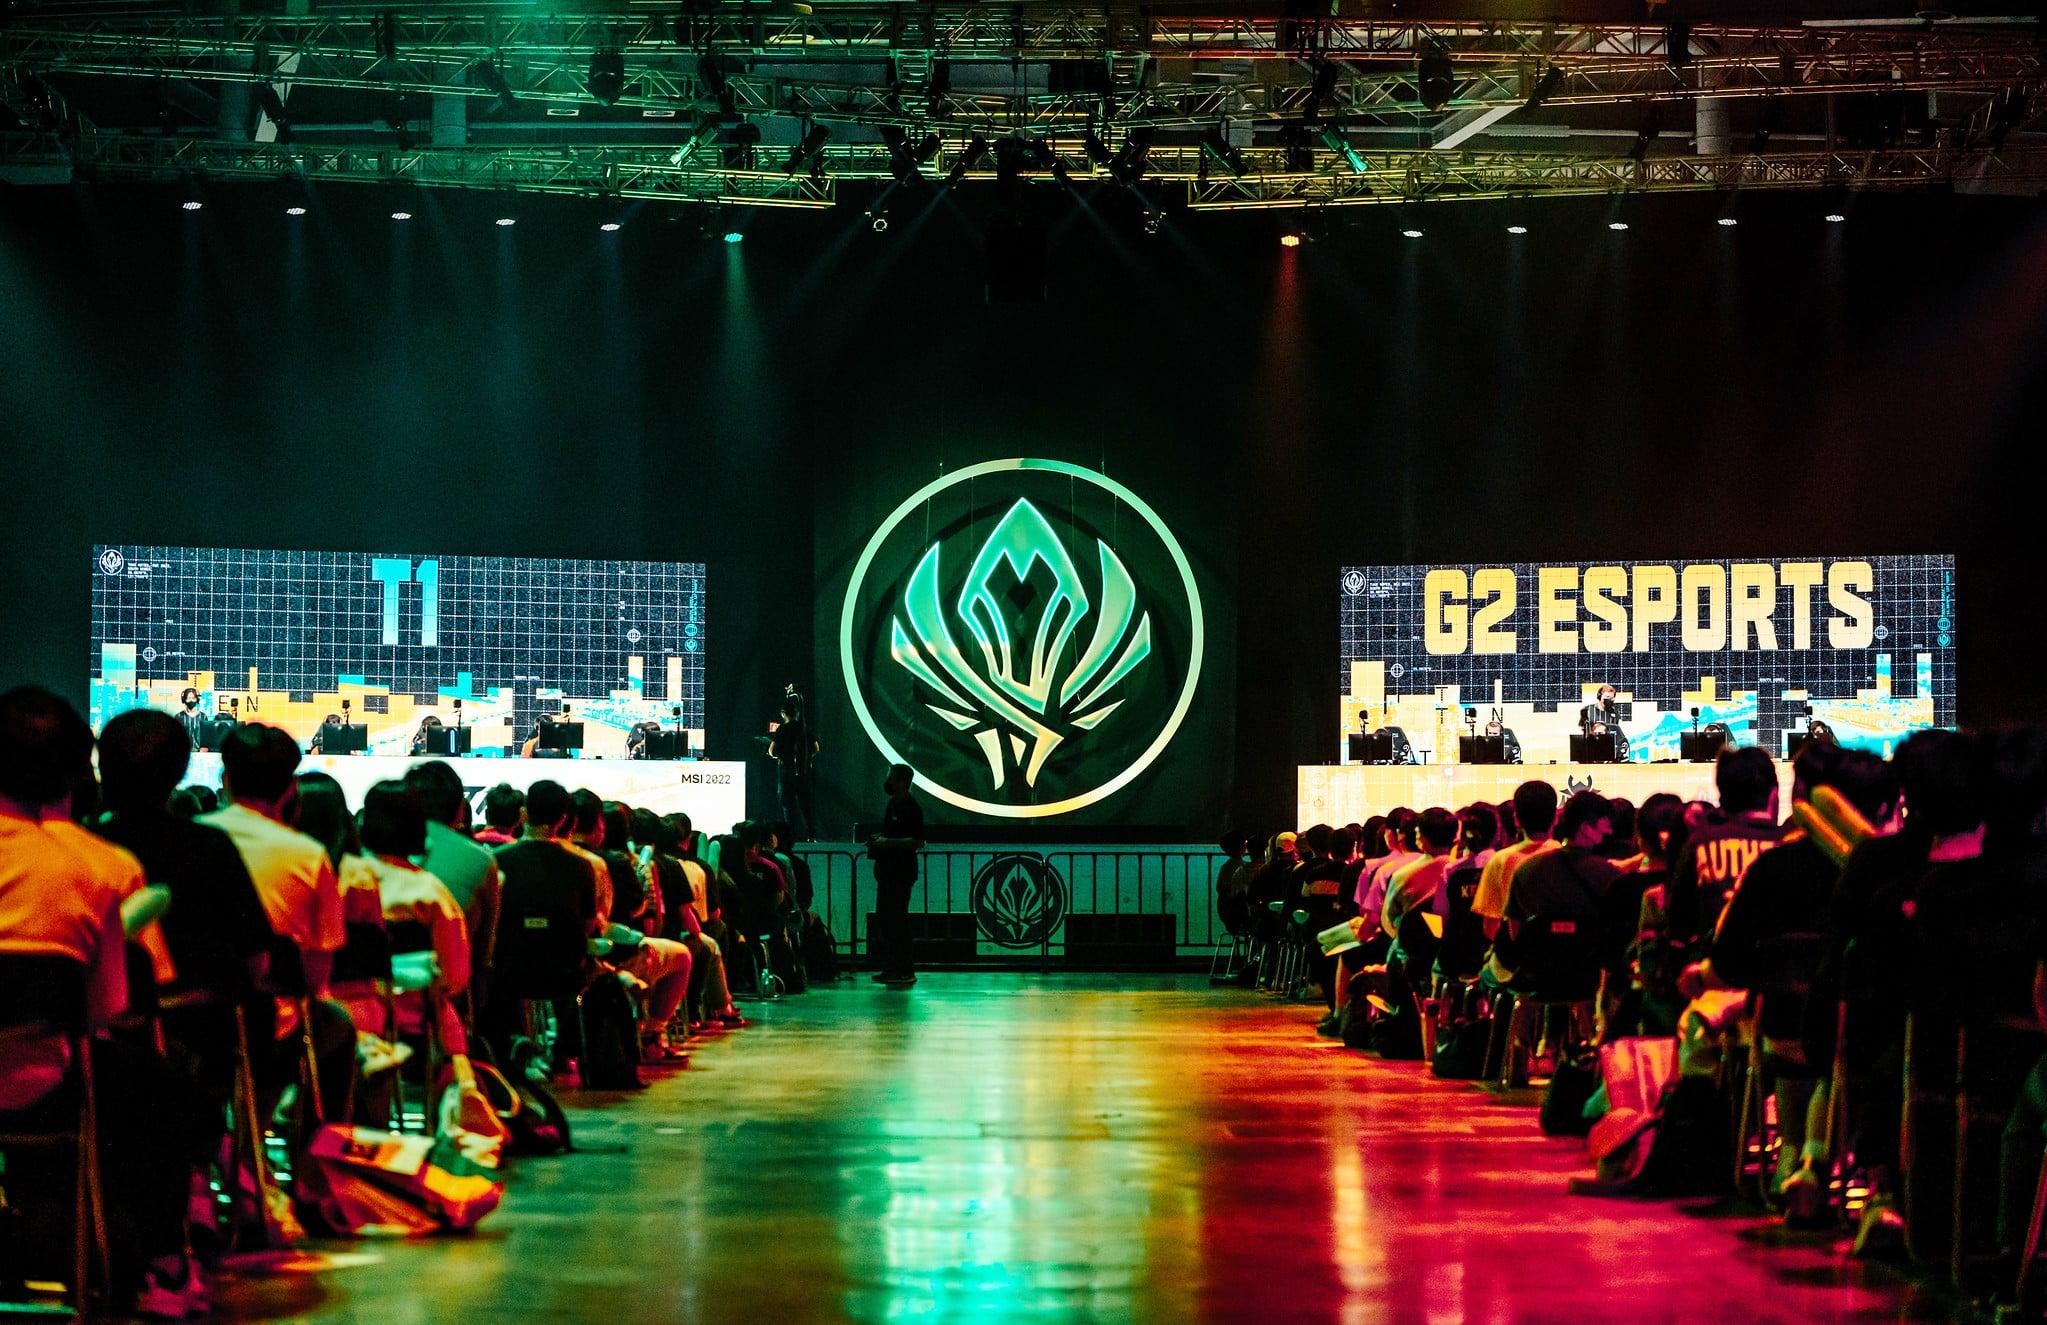 T1 and G2 Esports on stage at MSI 2022